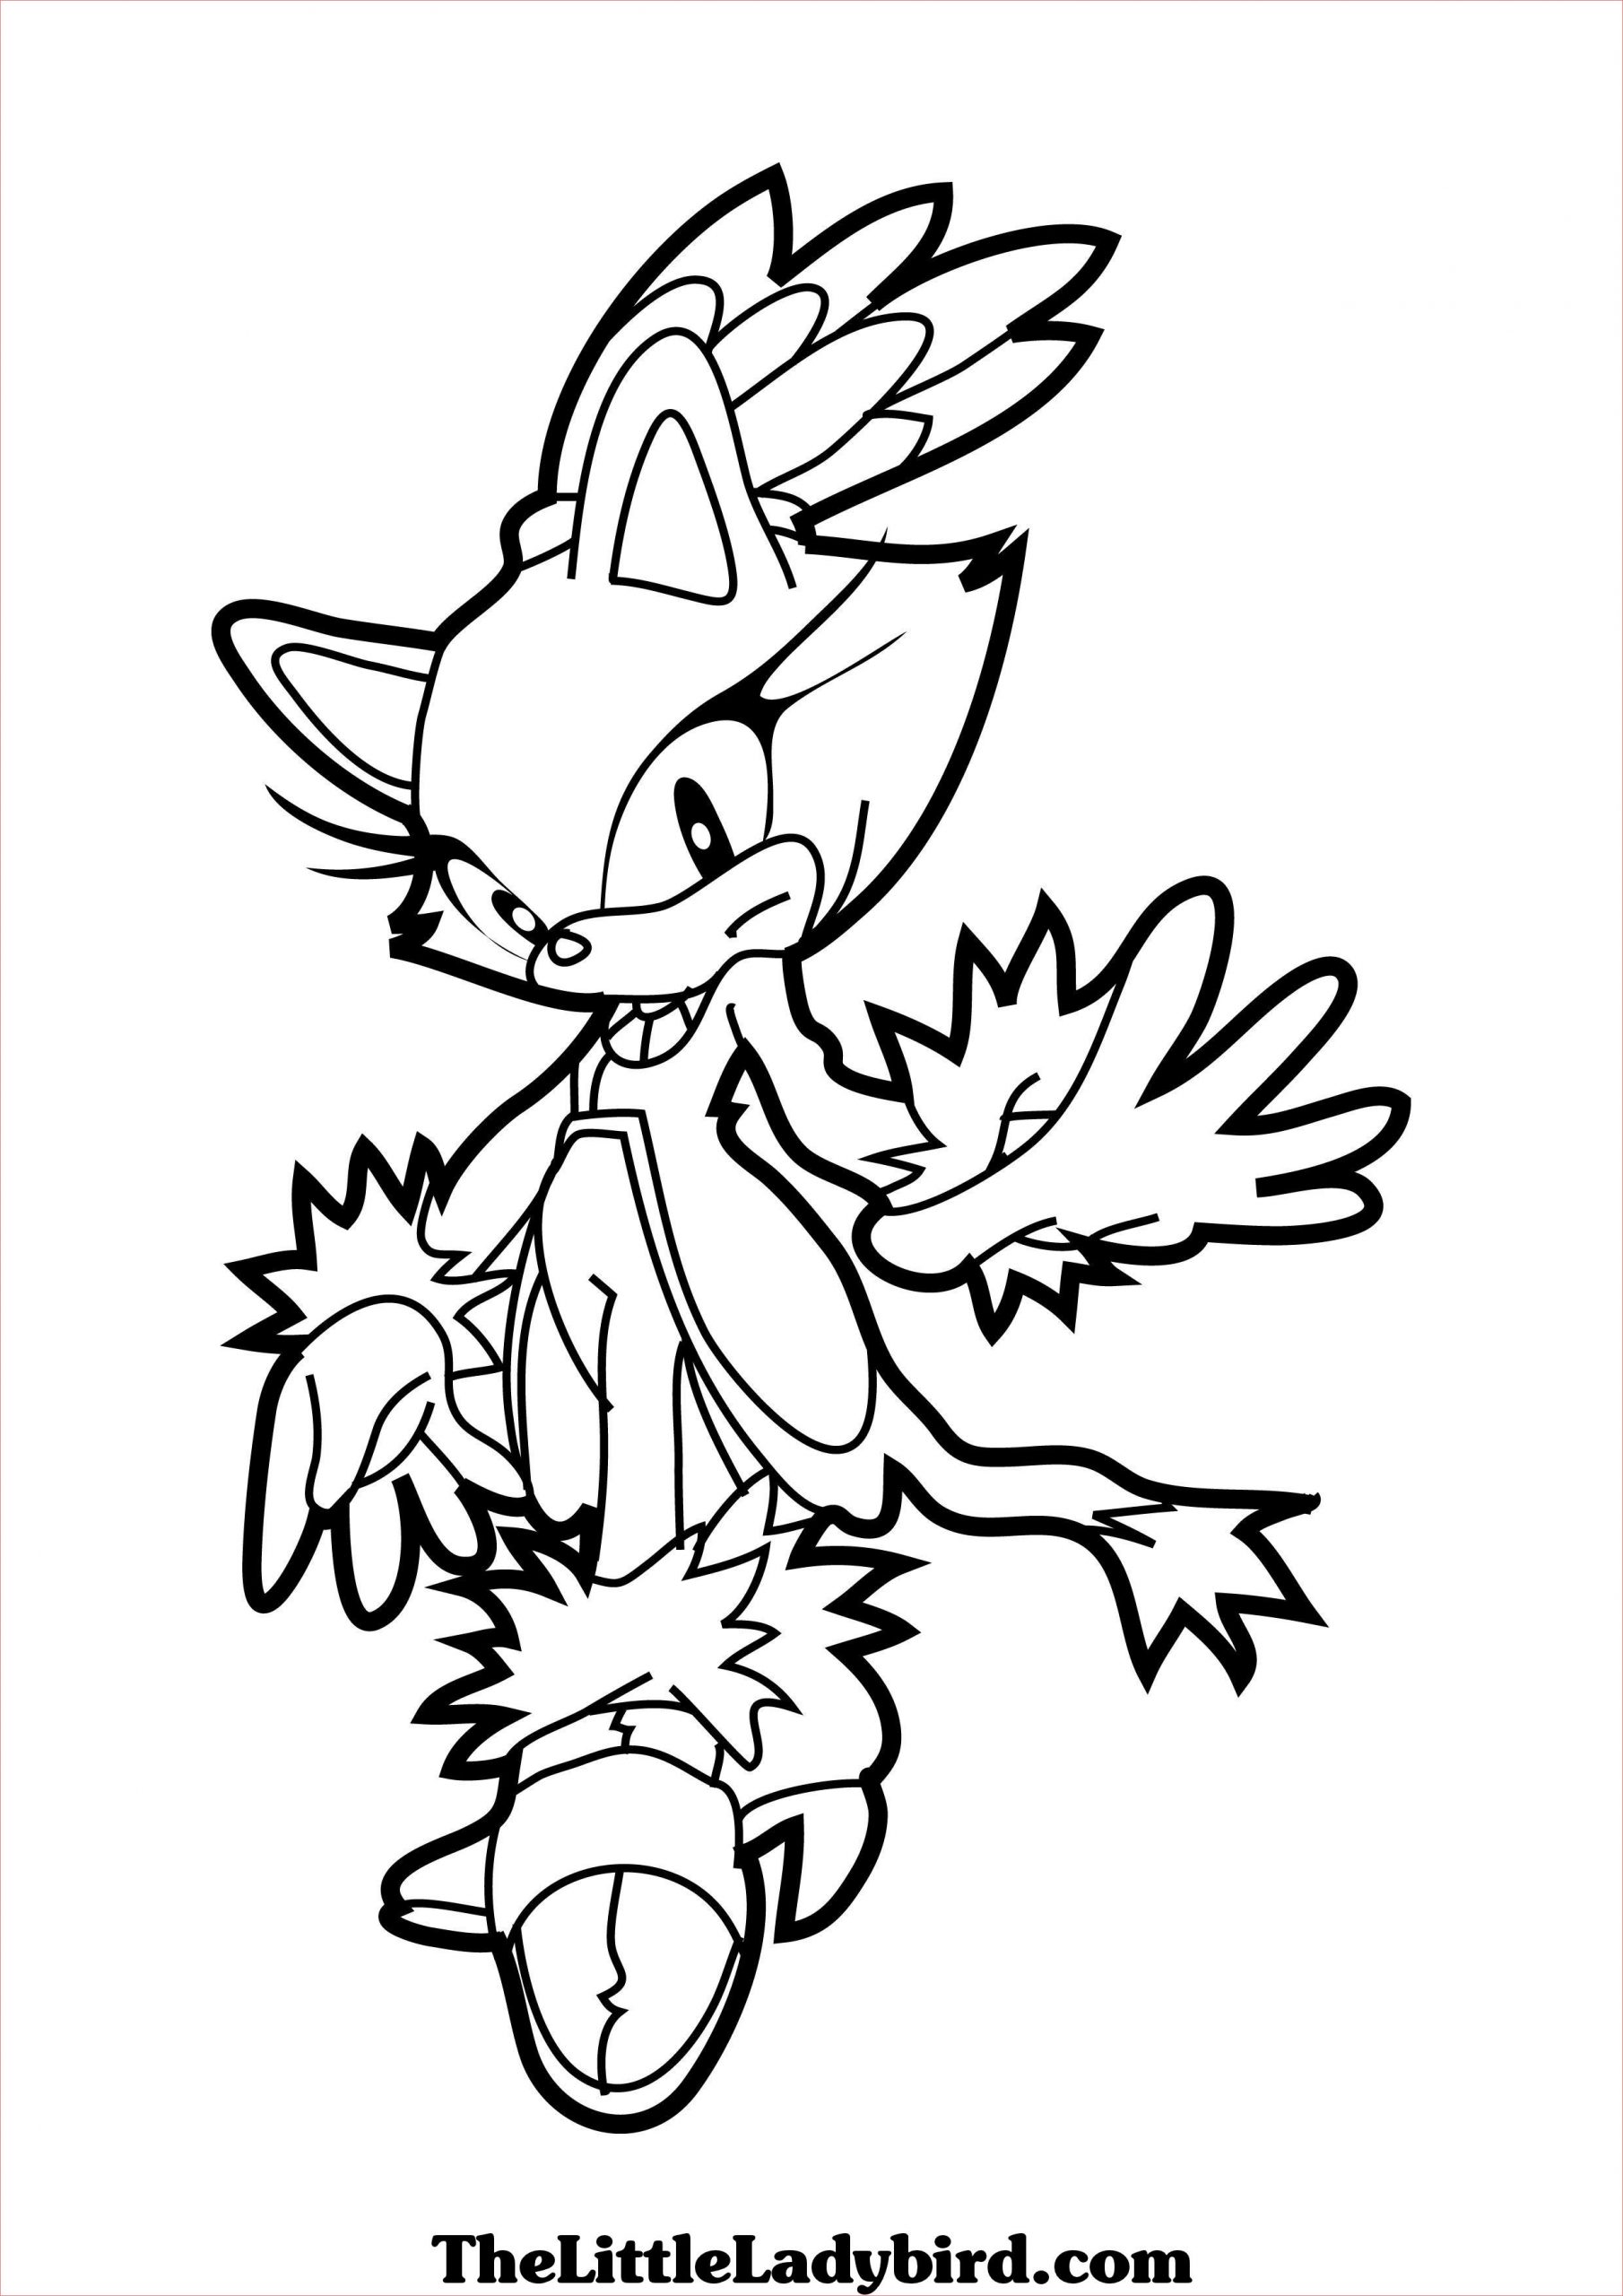 sonic coloring pages disney coloring pages for kids color pages coloring pages to print kids coloring pages 46 printable coloring pages